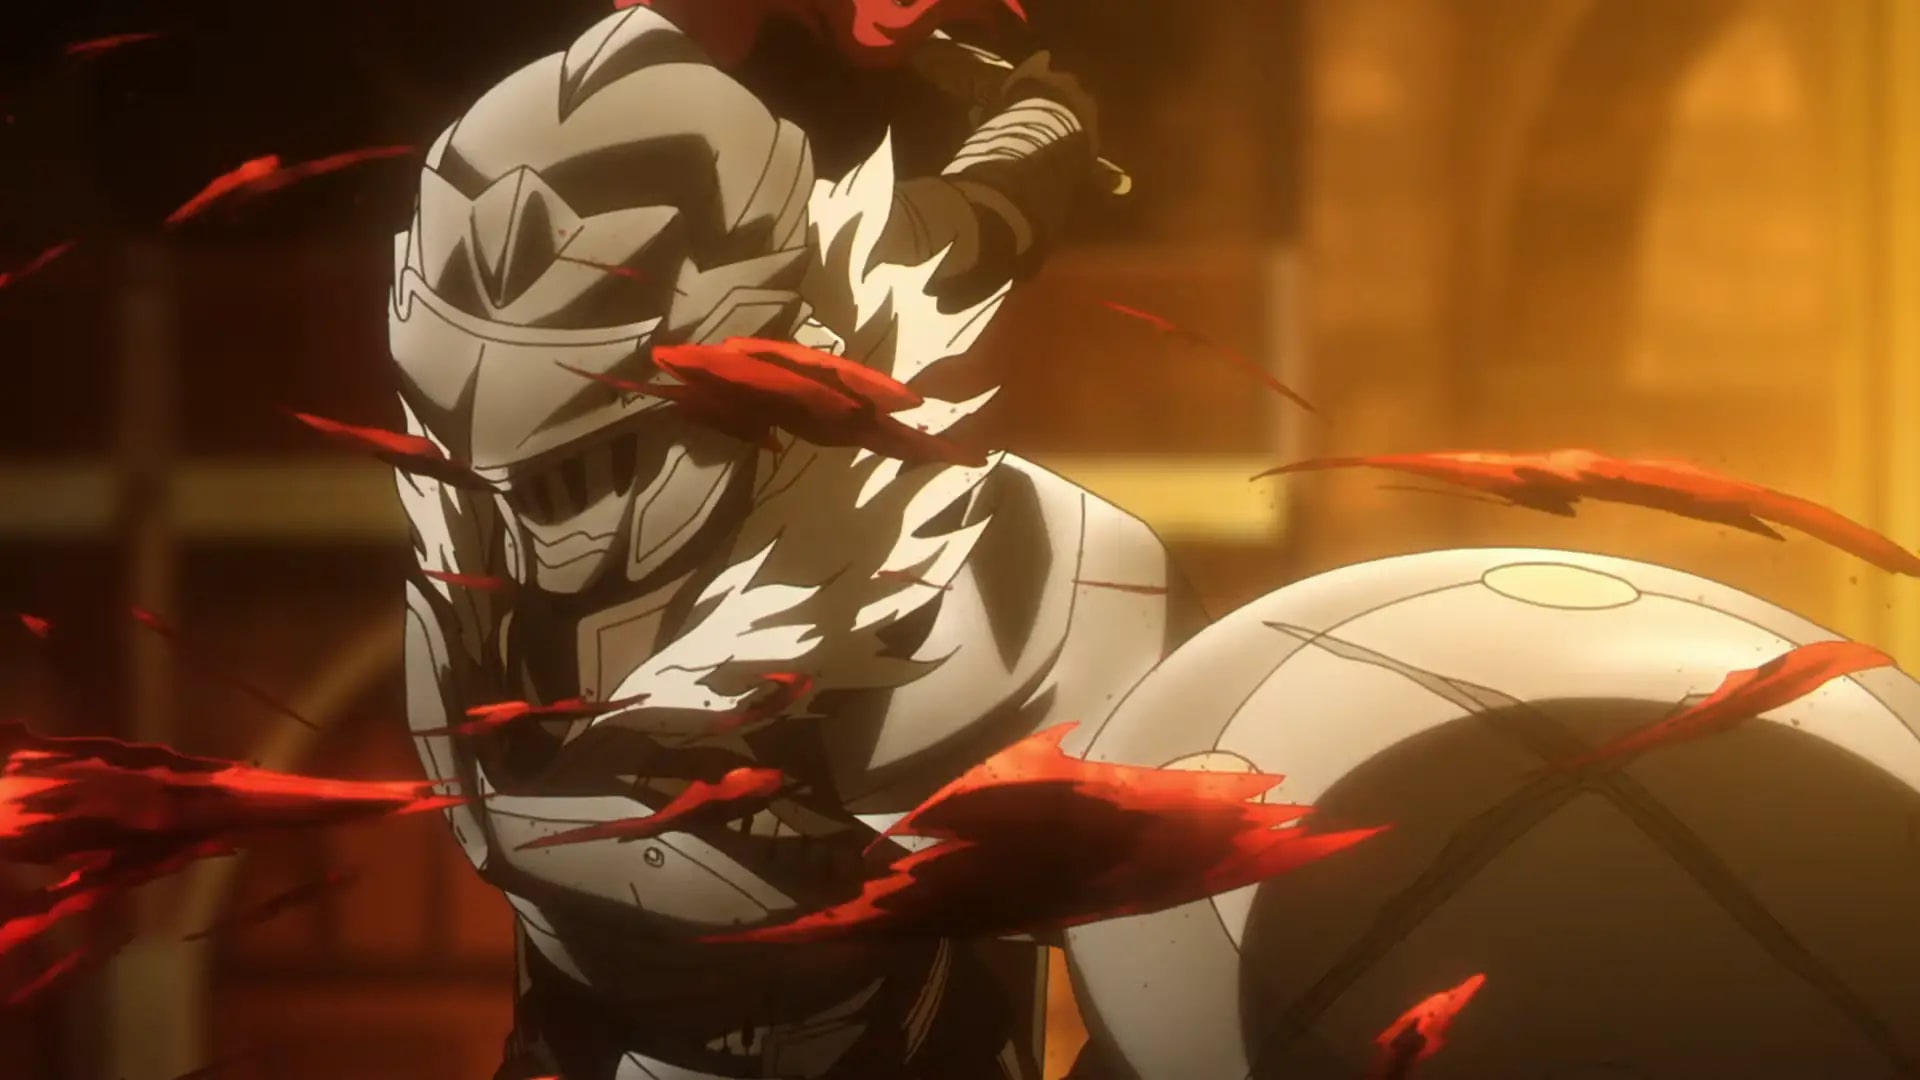 Goblin Slayer: 7 Things You Might Not Know About Hero